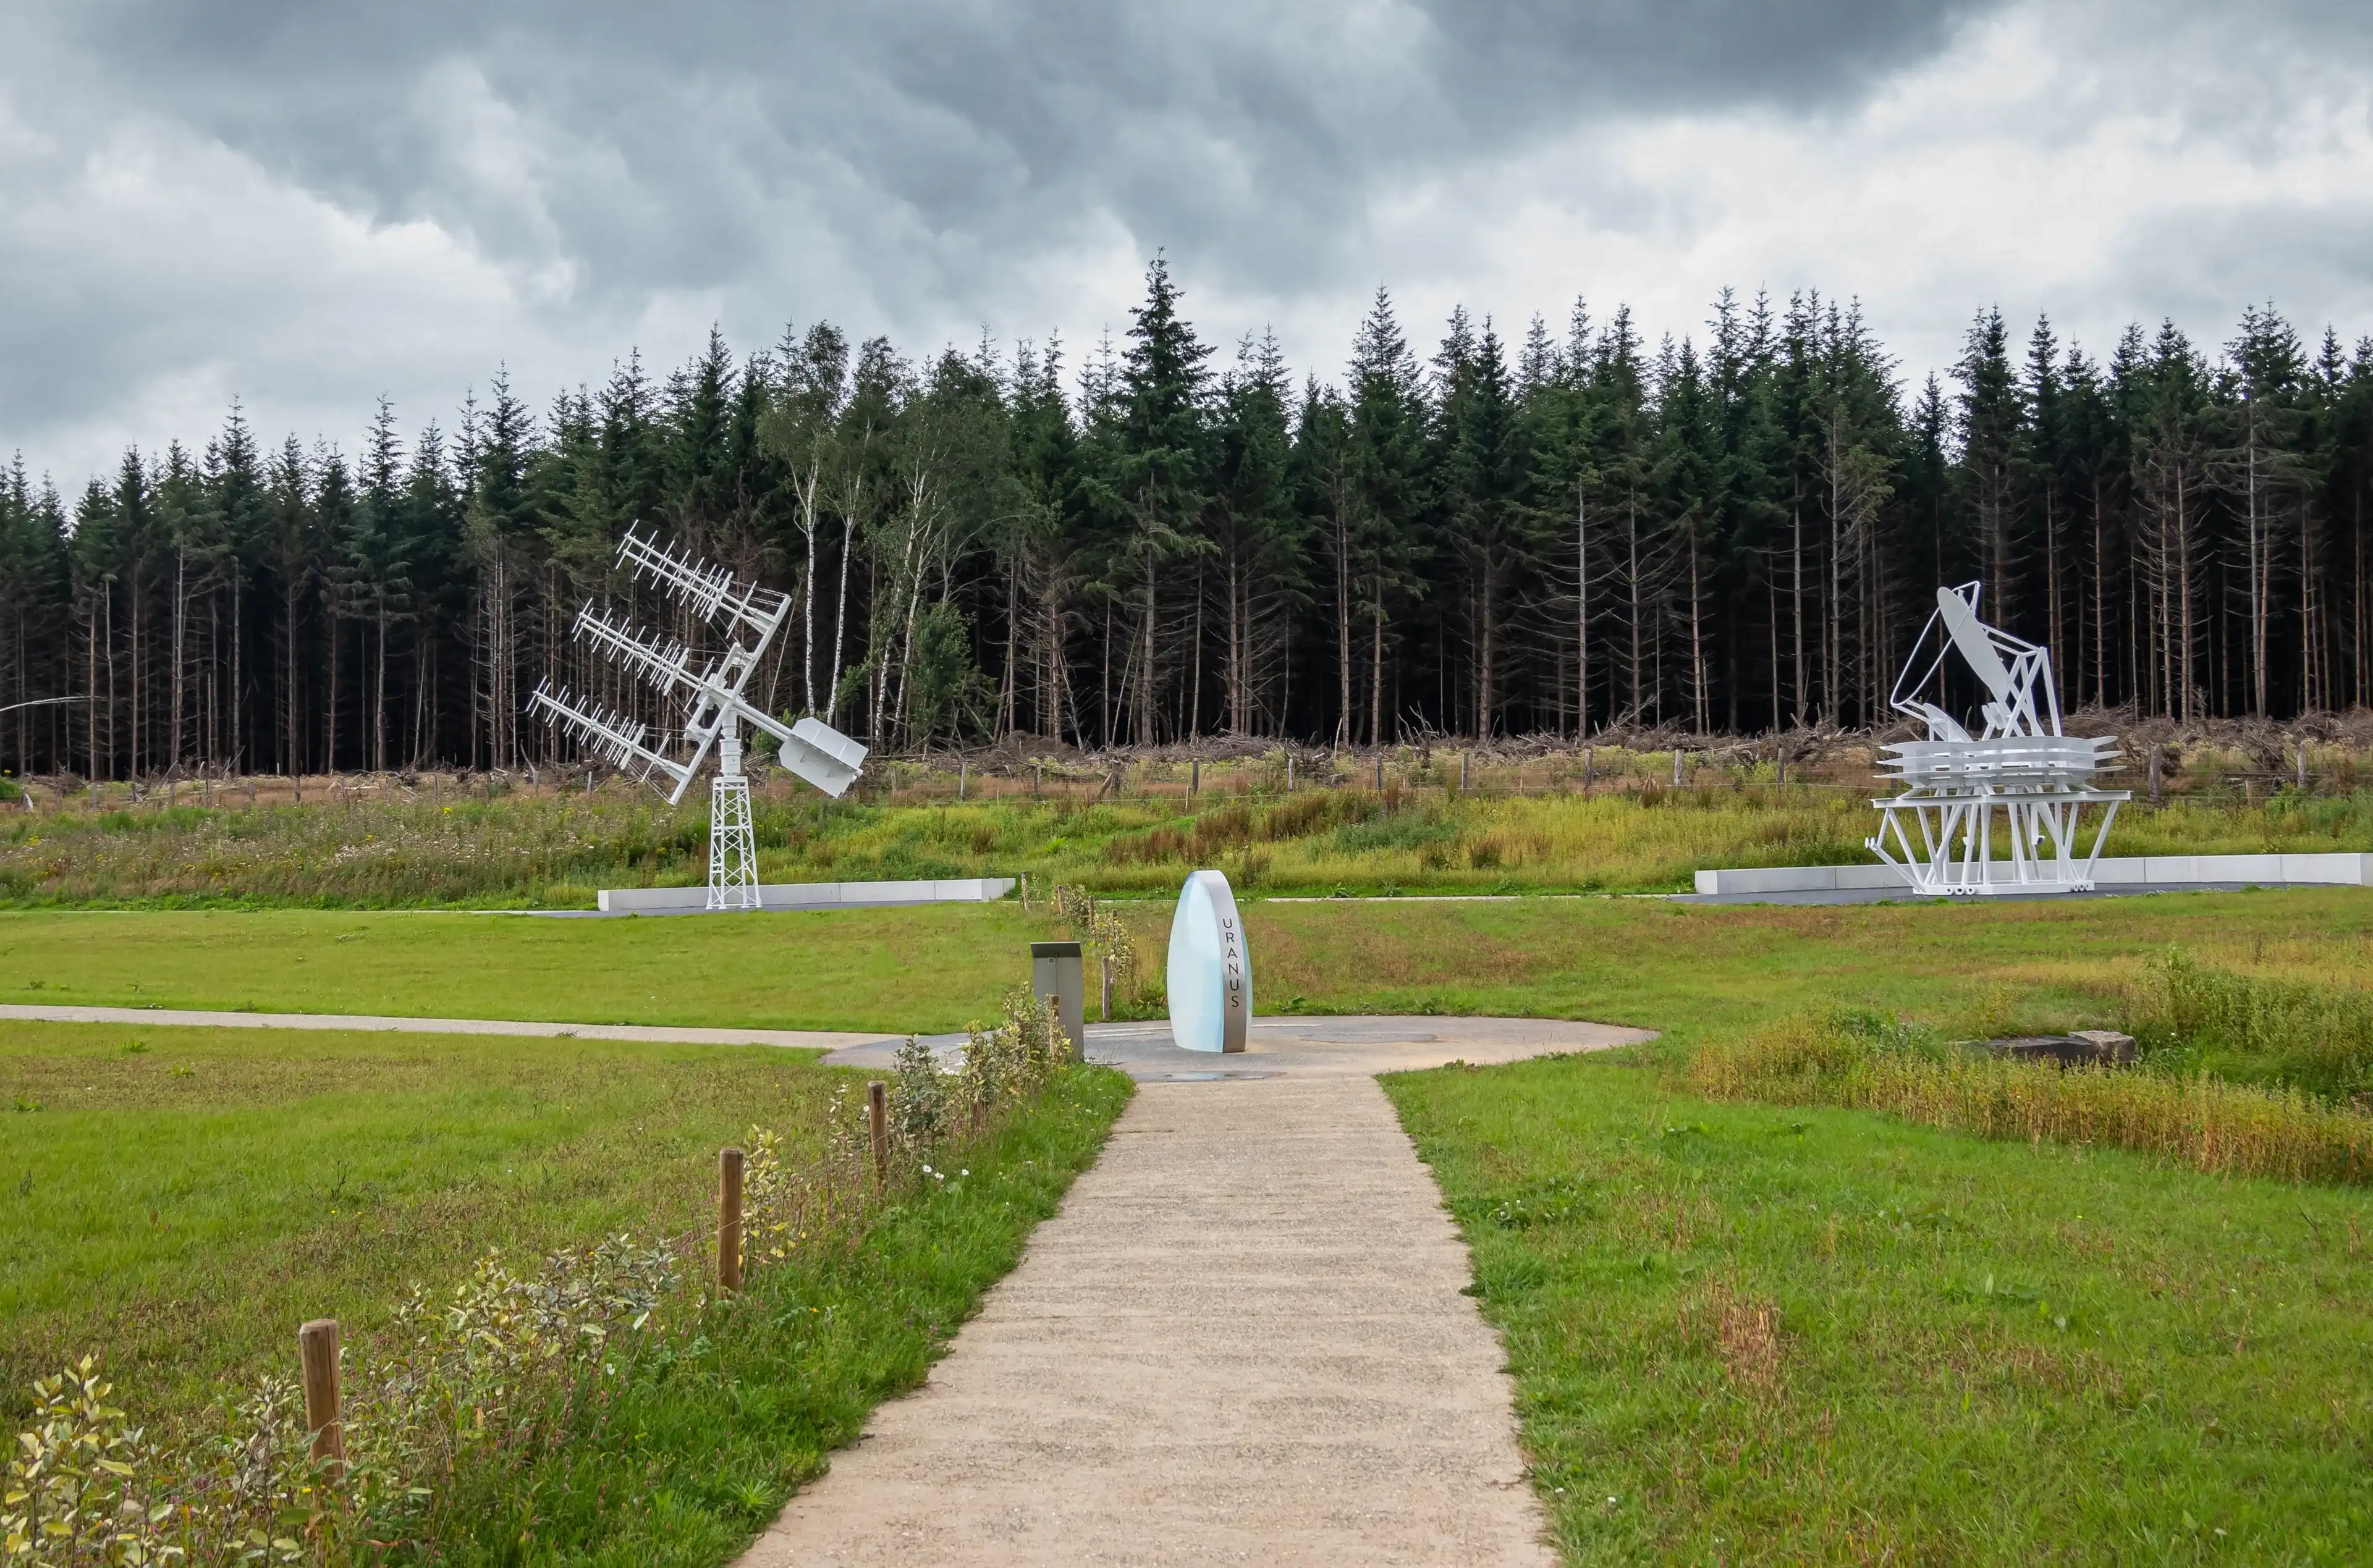 Transinne, Wallonia, Belgium - August 10, 2021: Euro Space Center. Uranus symbol and the Planck Mock Up and Yagi Antennas under rainy cloudscape. Dark green forest in back.